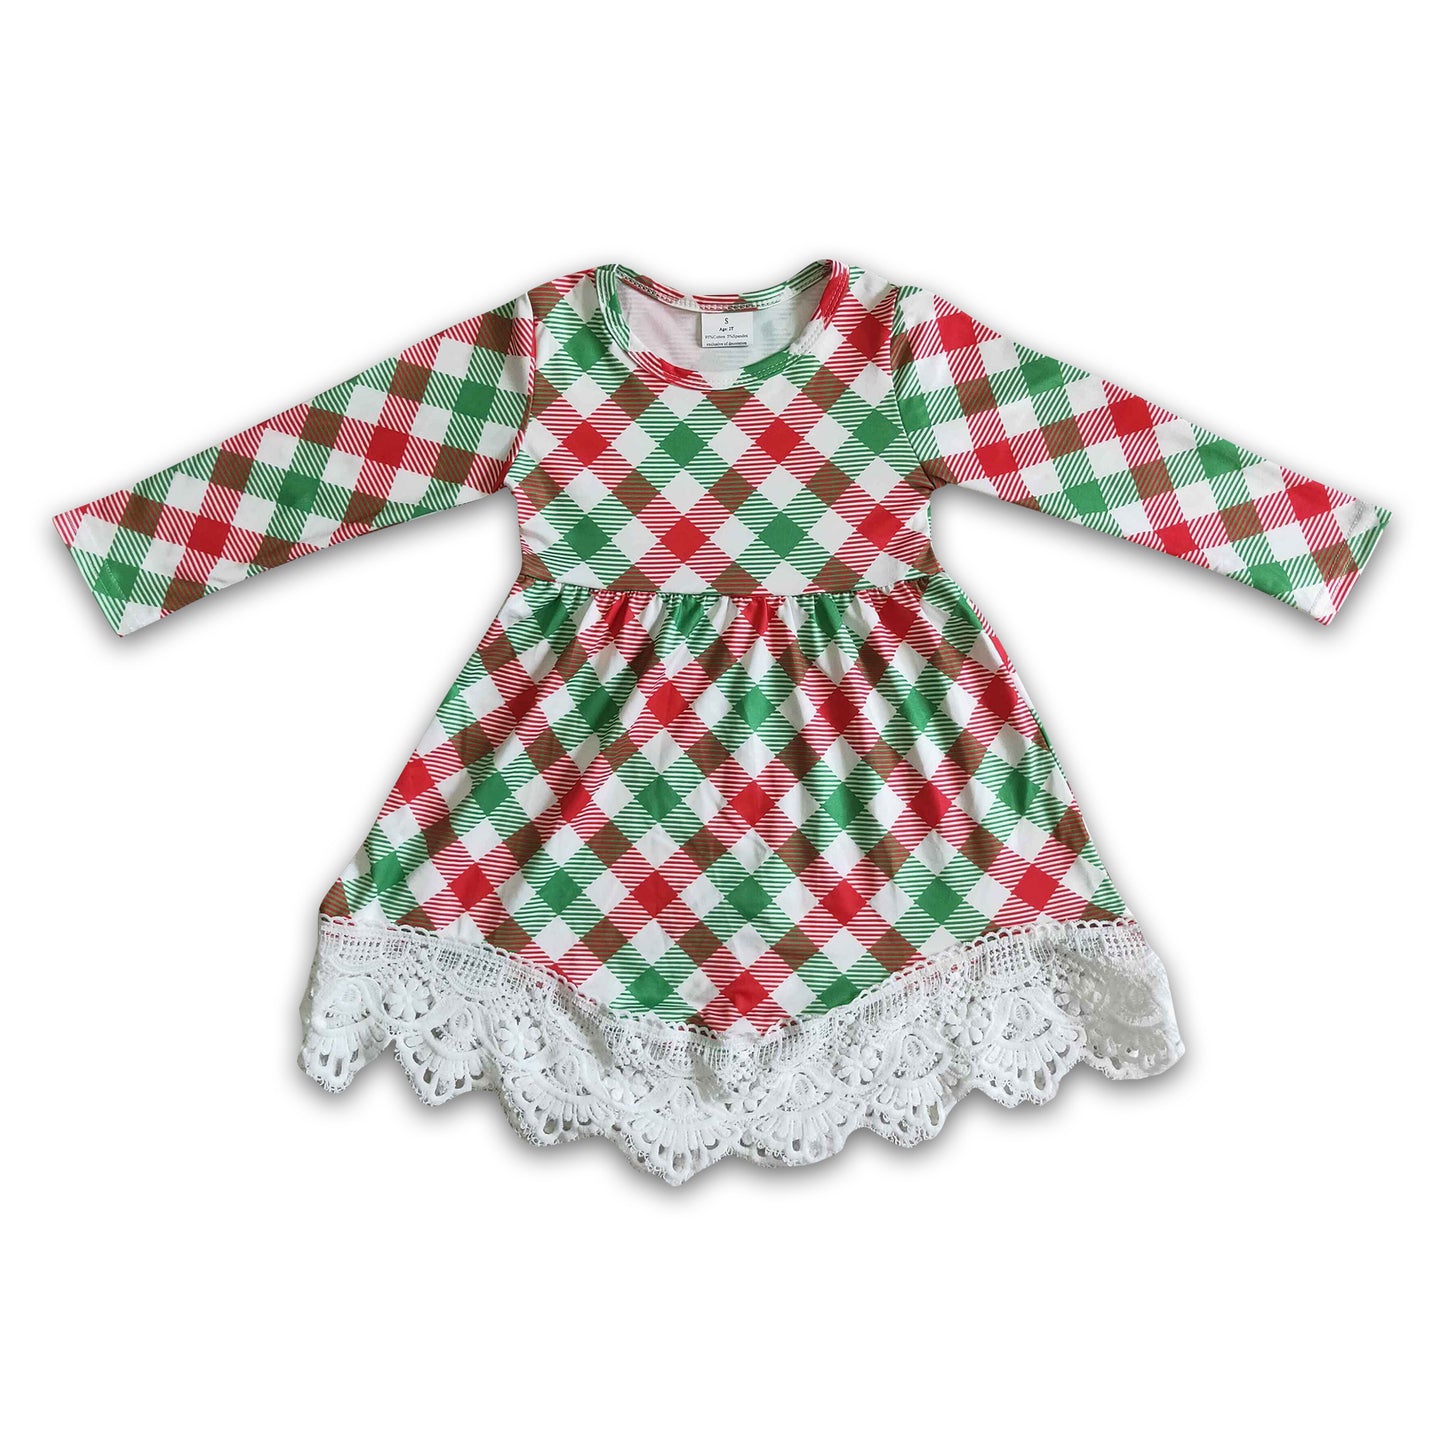 Green red plaid lace kids girls Christmas dresses